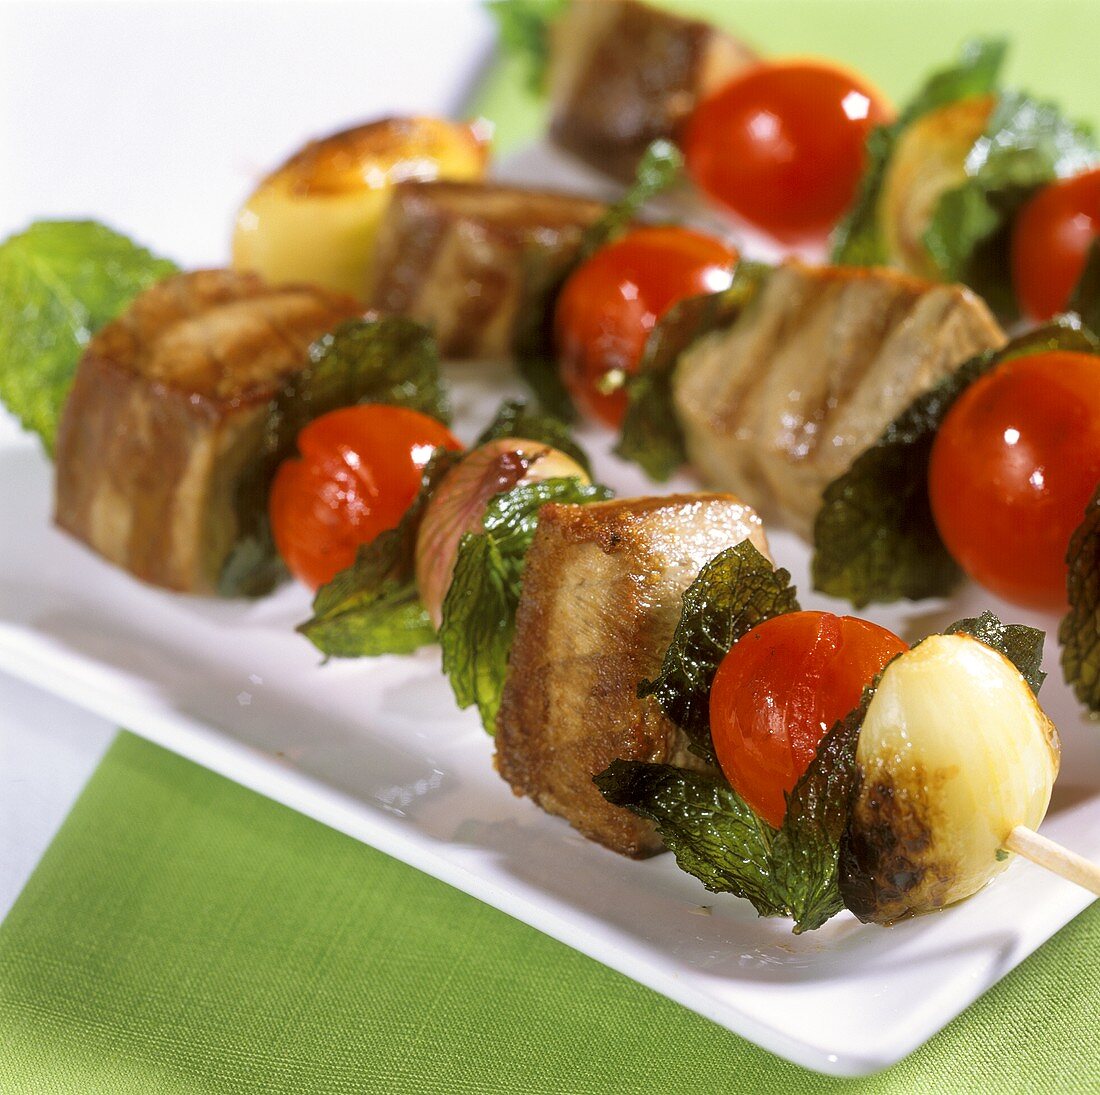 Barbecued tuna kebabs with cherry tomatoes and mint